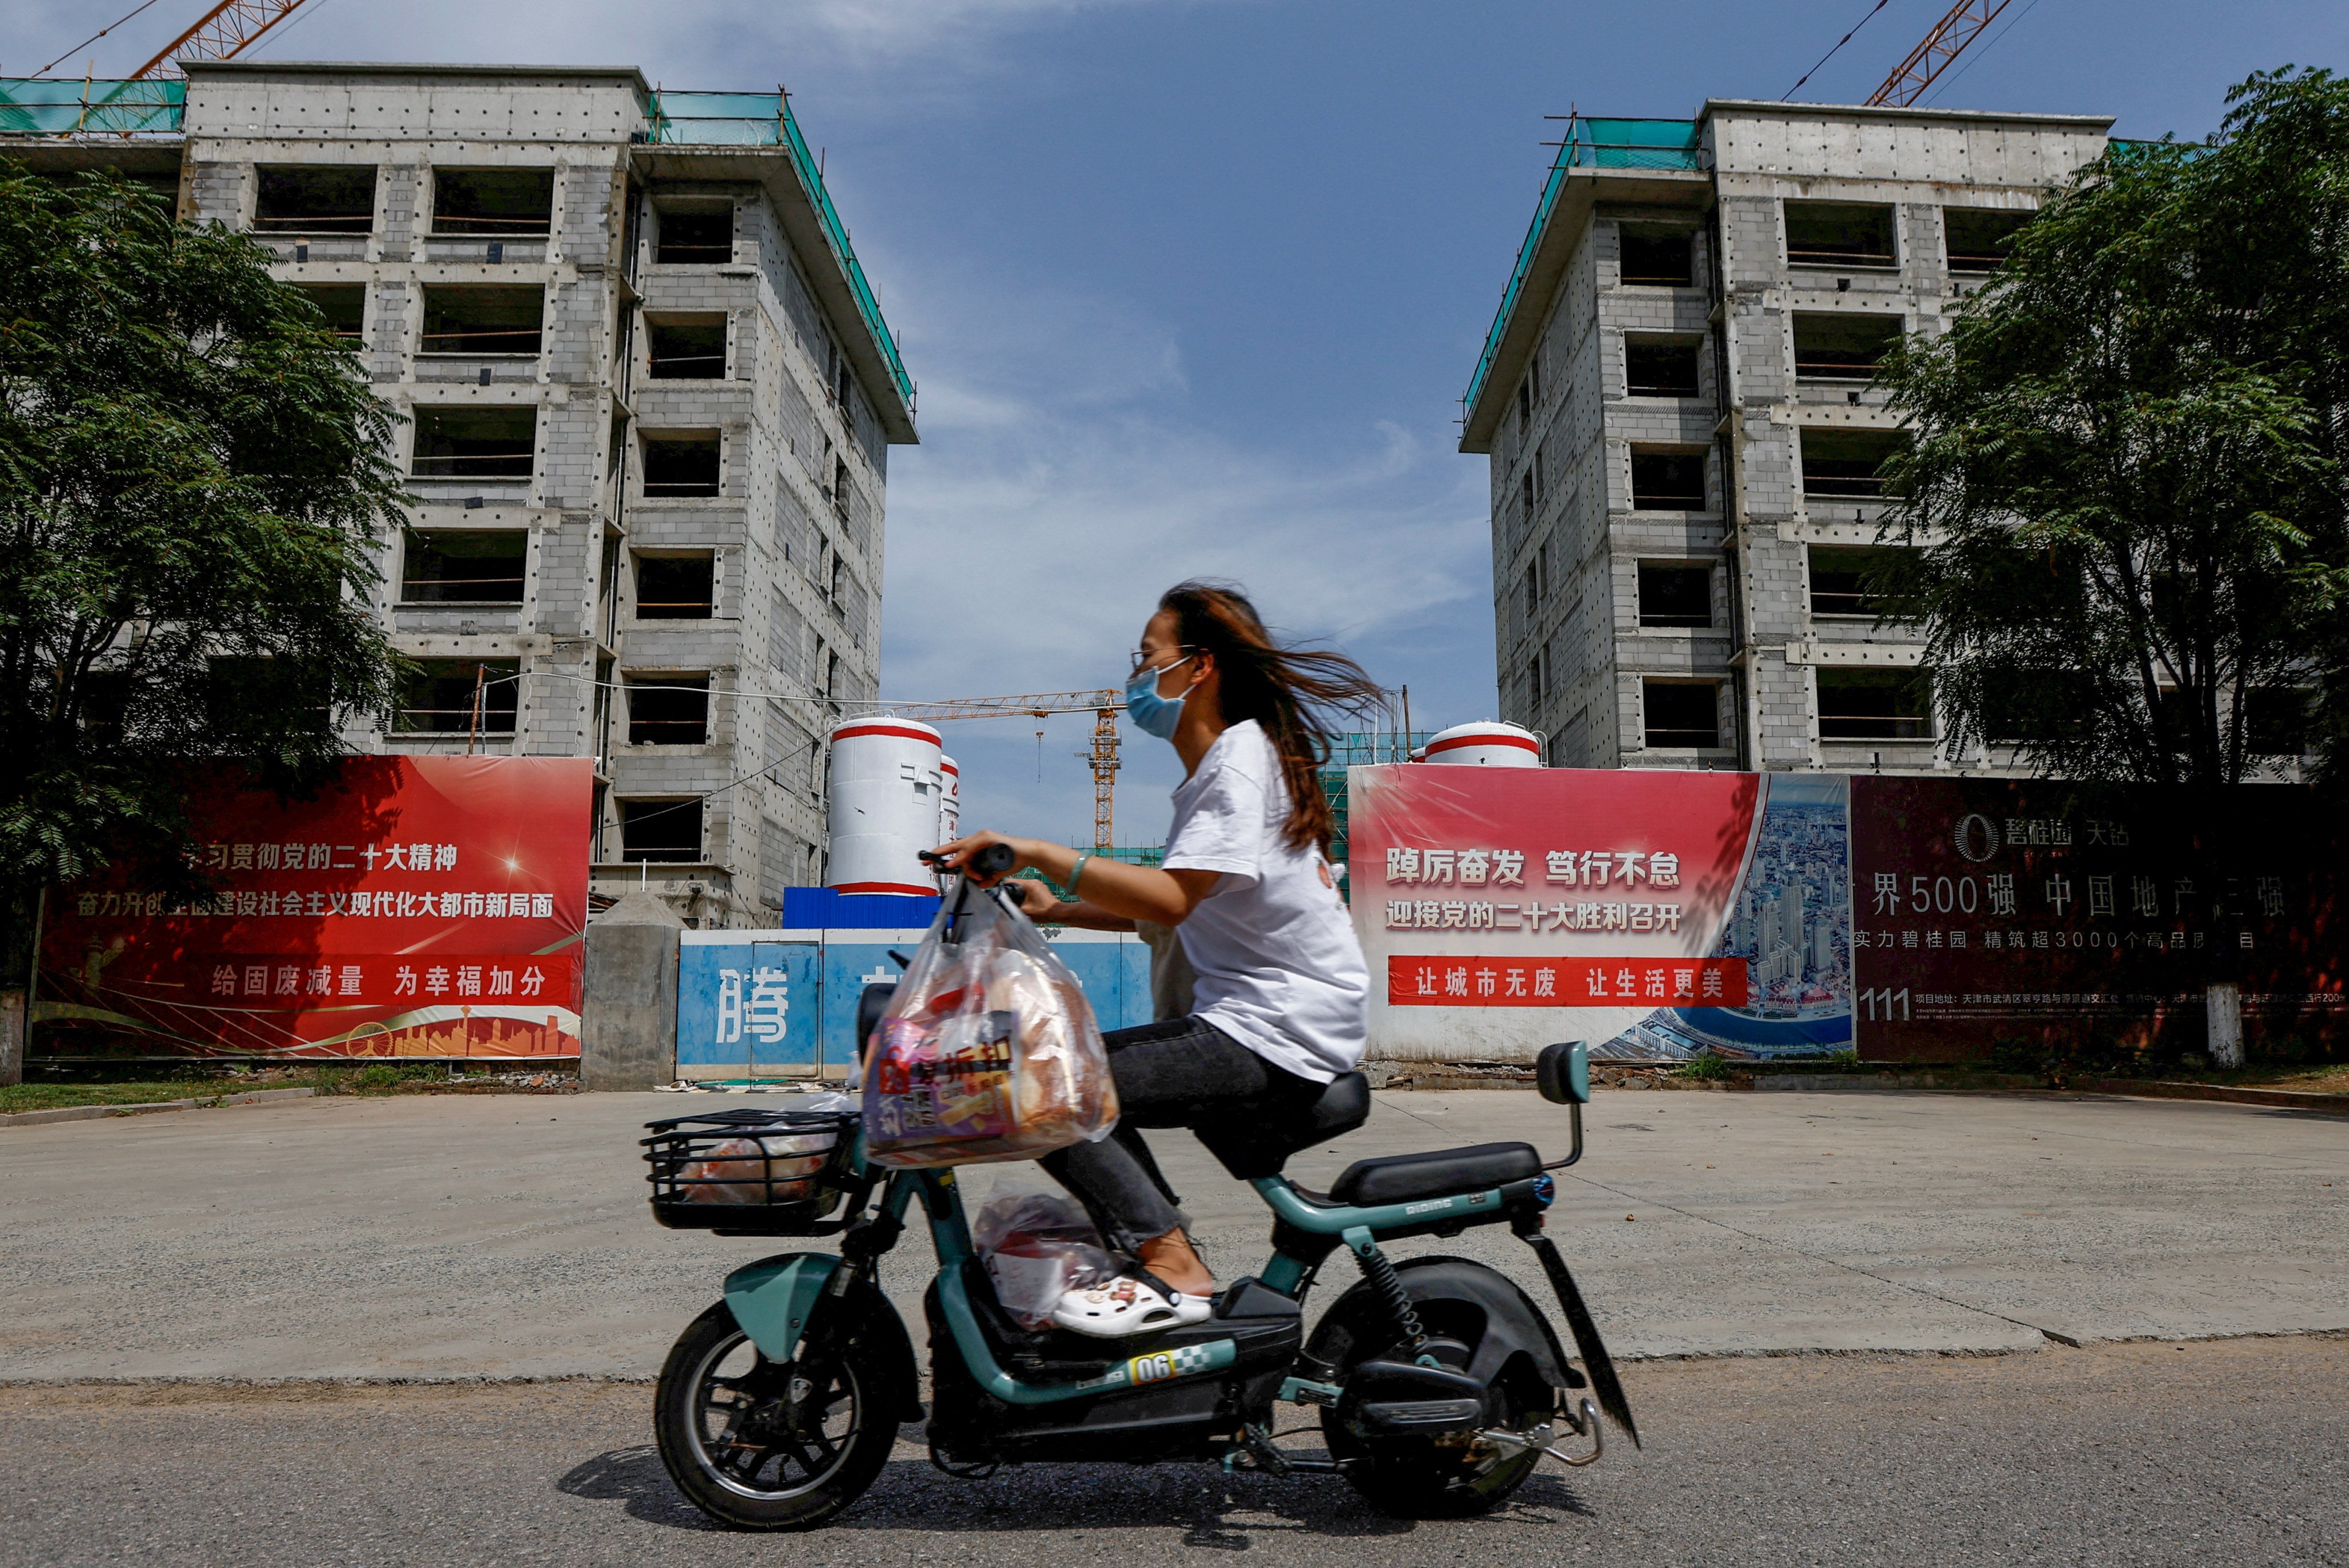 A woman rides a scooter past a construction site in Tianjin on August 18. China is busy dealing with its “twin cancers”: a property bubble and shadow banking system rife with Ponzi schemes. Photo: Reuters